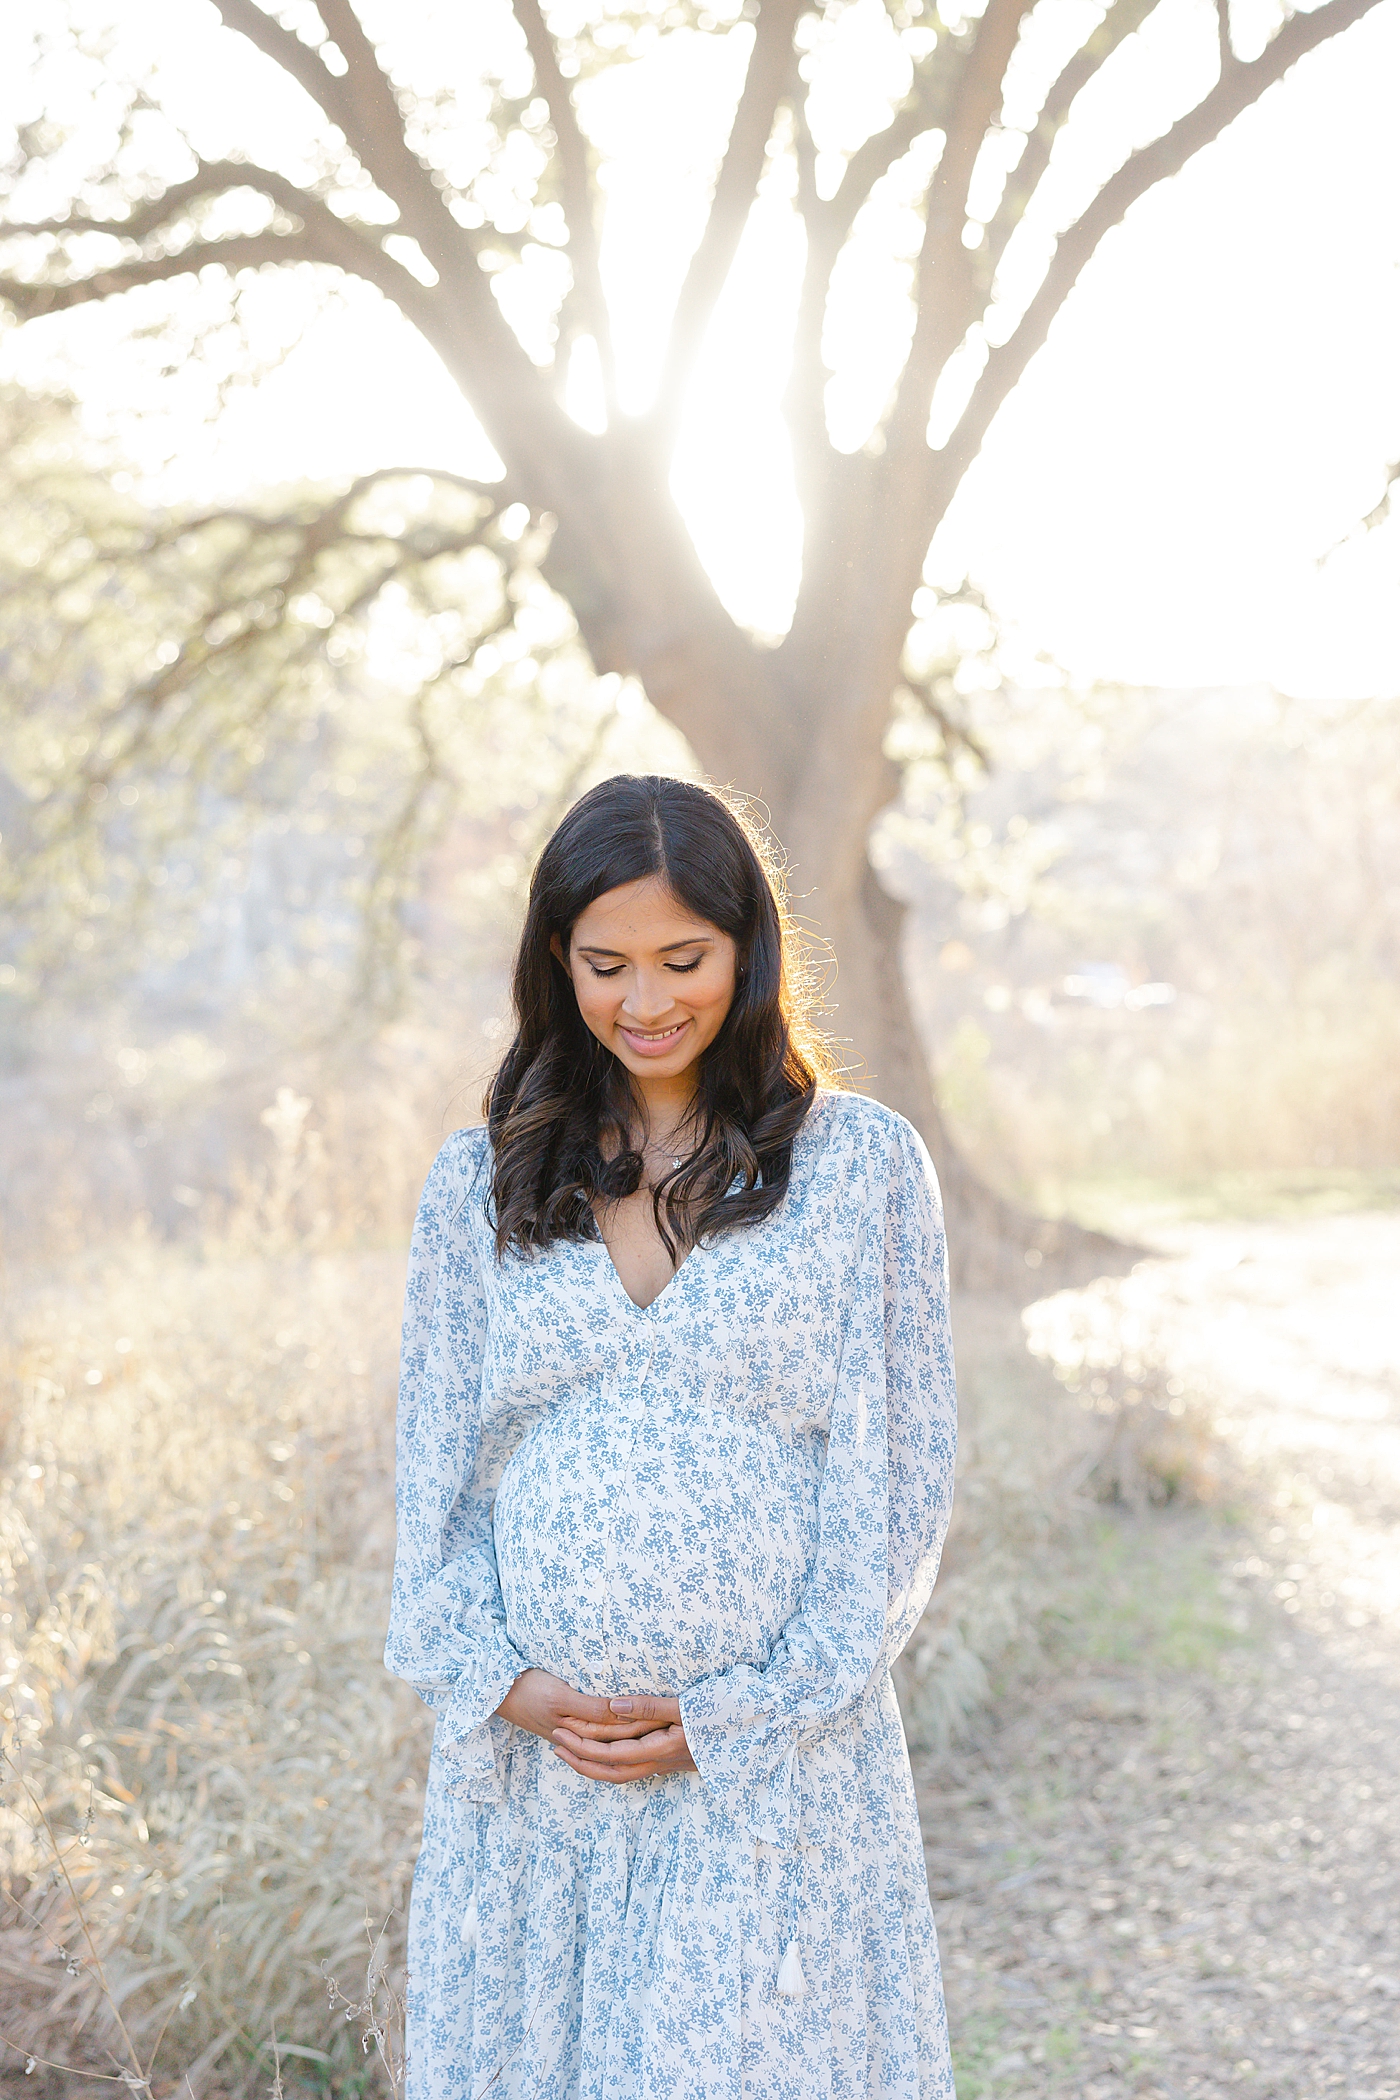 Mom to be in blue dress holding her belly | Images by Sana Ahmed 